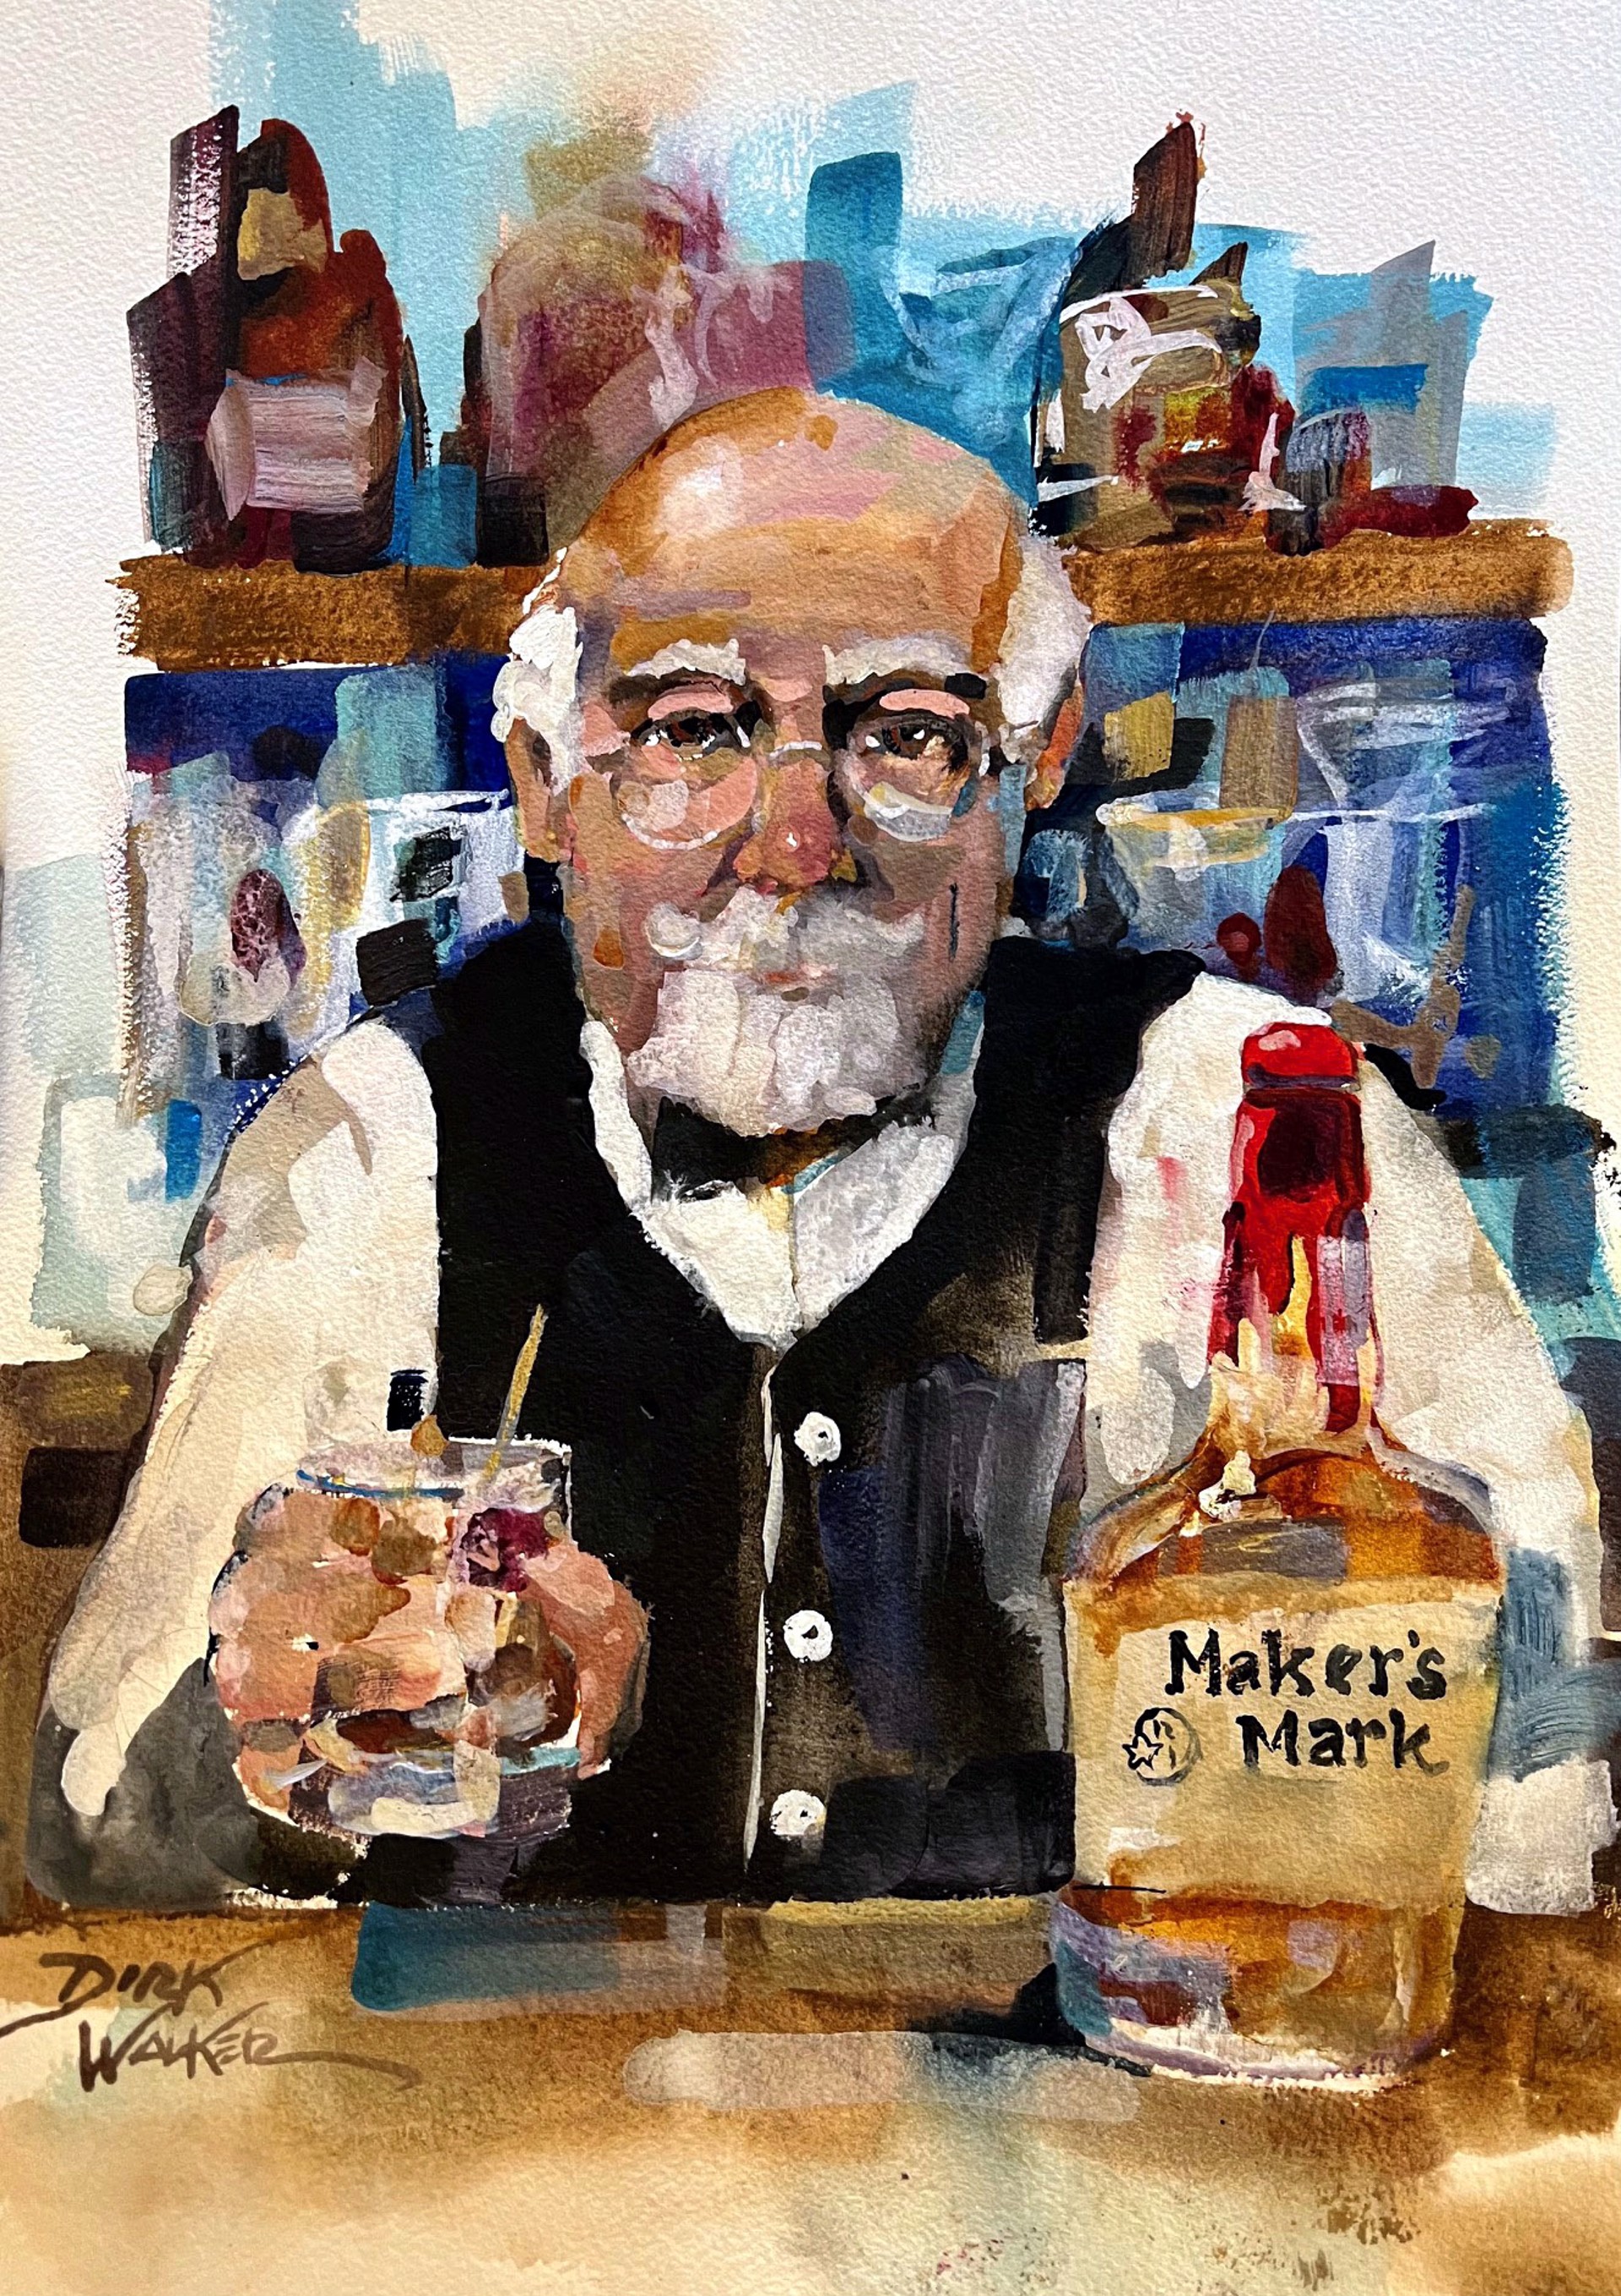 Hard to Beat a Maker's Old Fashion by Dirk Walker